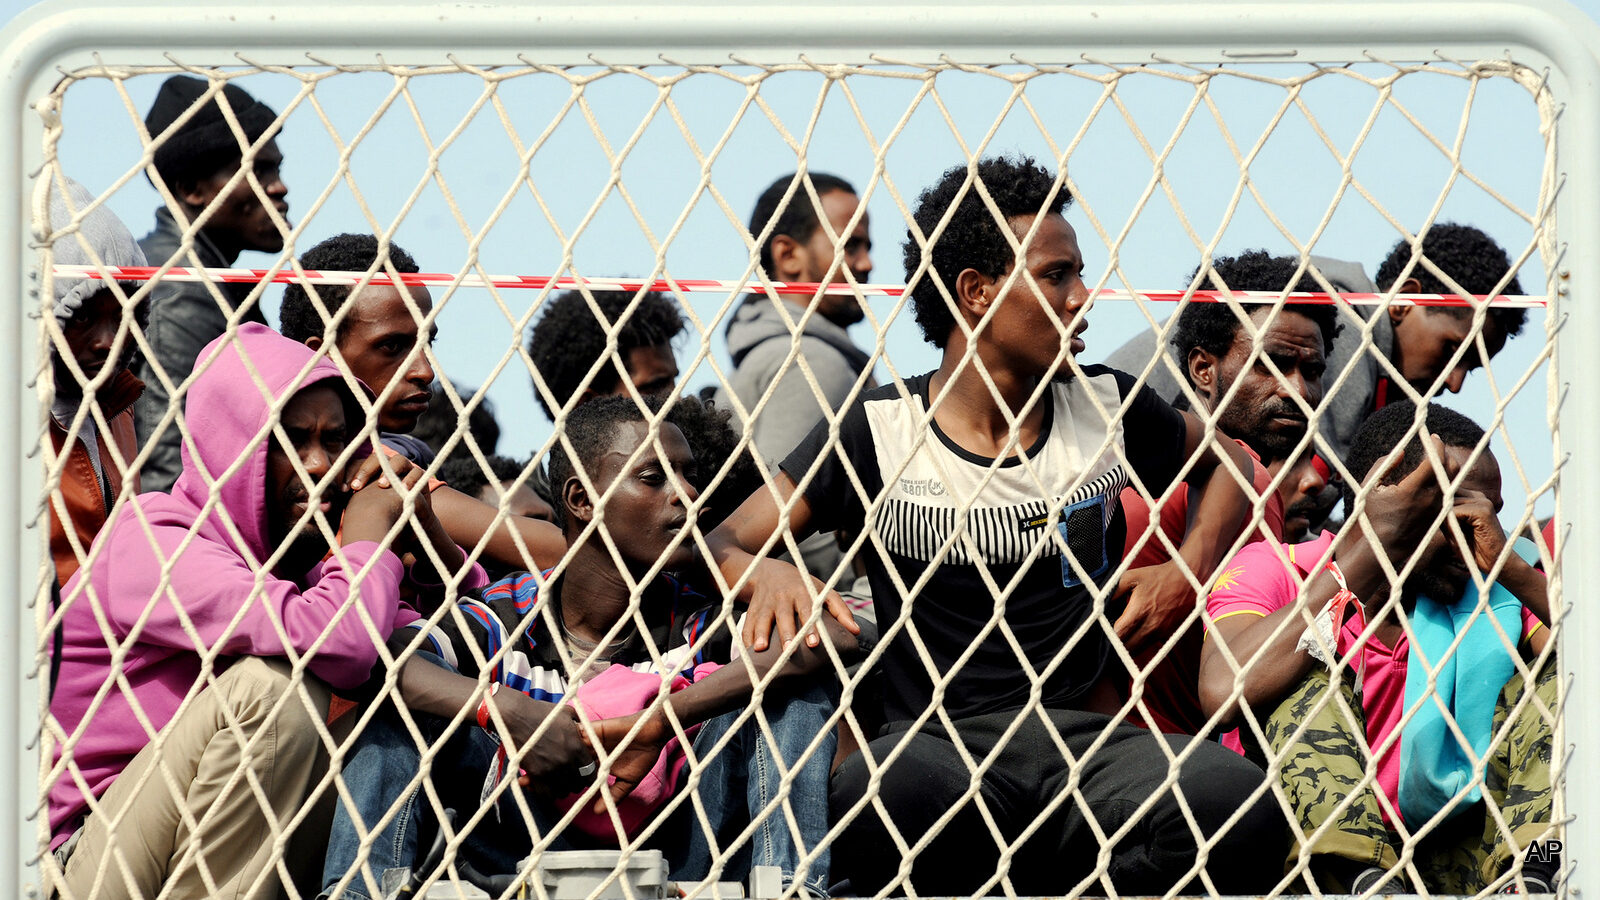 Migrants wait to disembark from the Italian Navy vessel 'Bettica' in the harbor of Salerno, Italy, Tuesday, May 5, 2015. About 700 migrants, including children, were rescued in the Sicilian Strait while they were trying to cross. (AP Photo/Francesco Pecoraro)